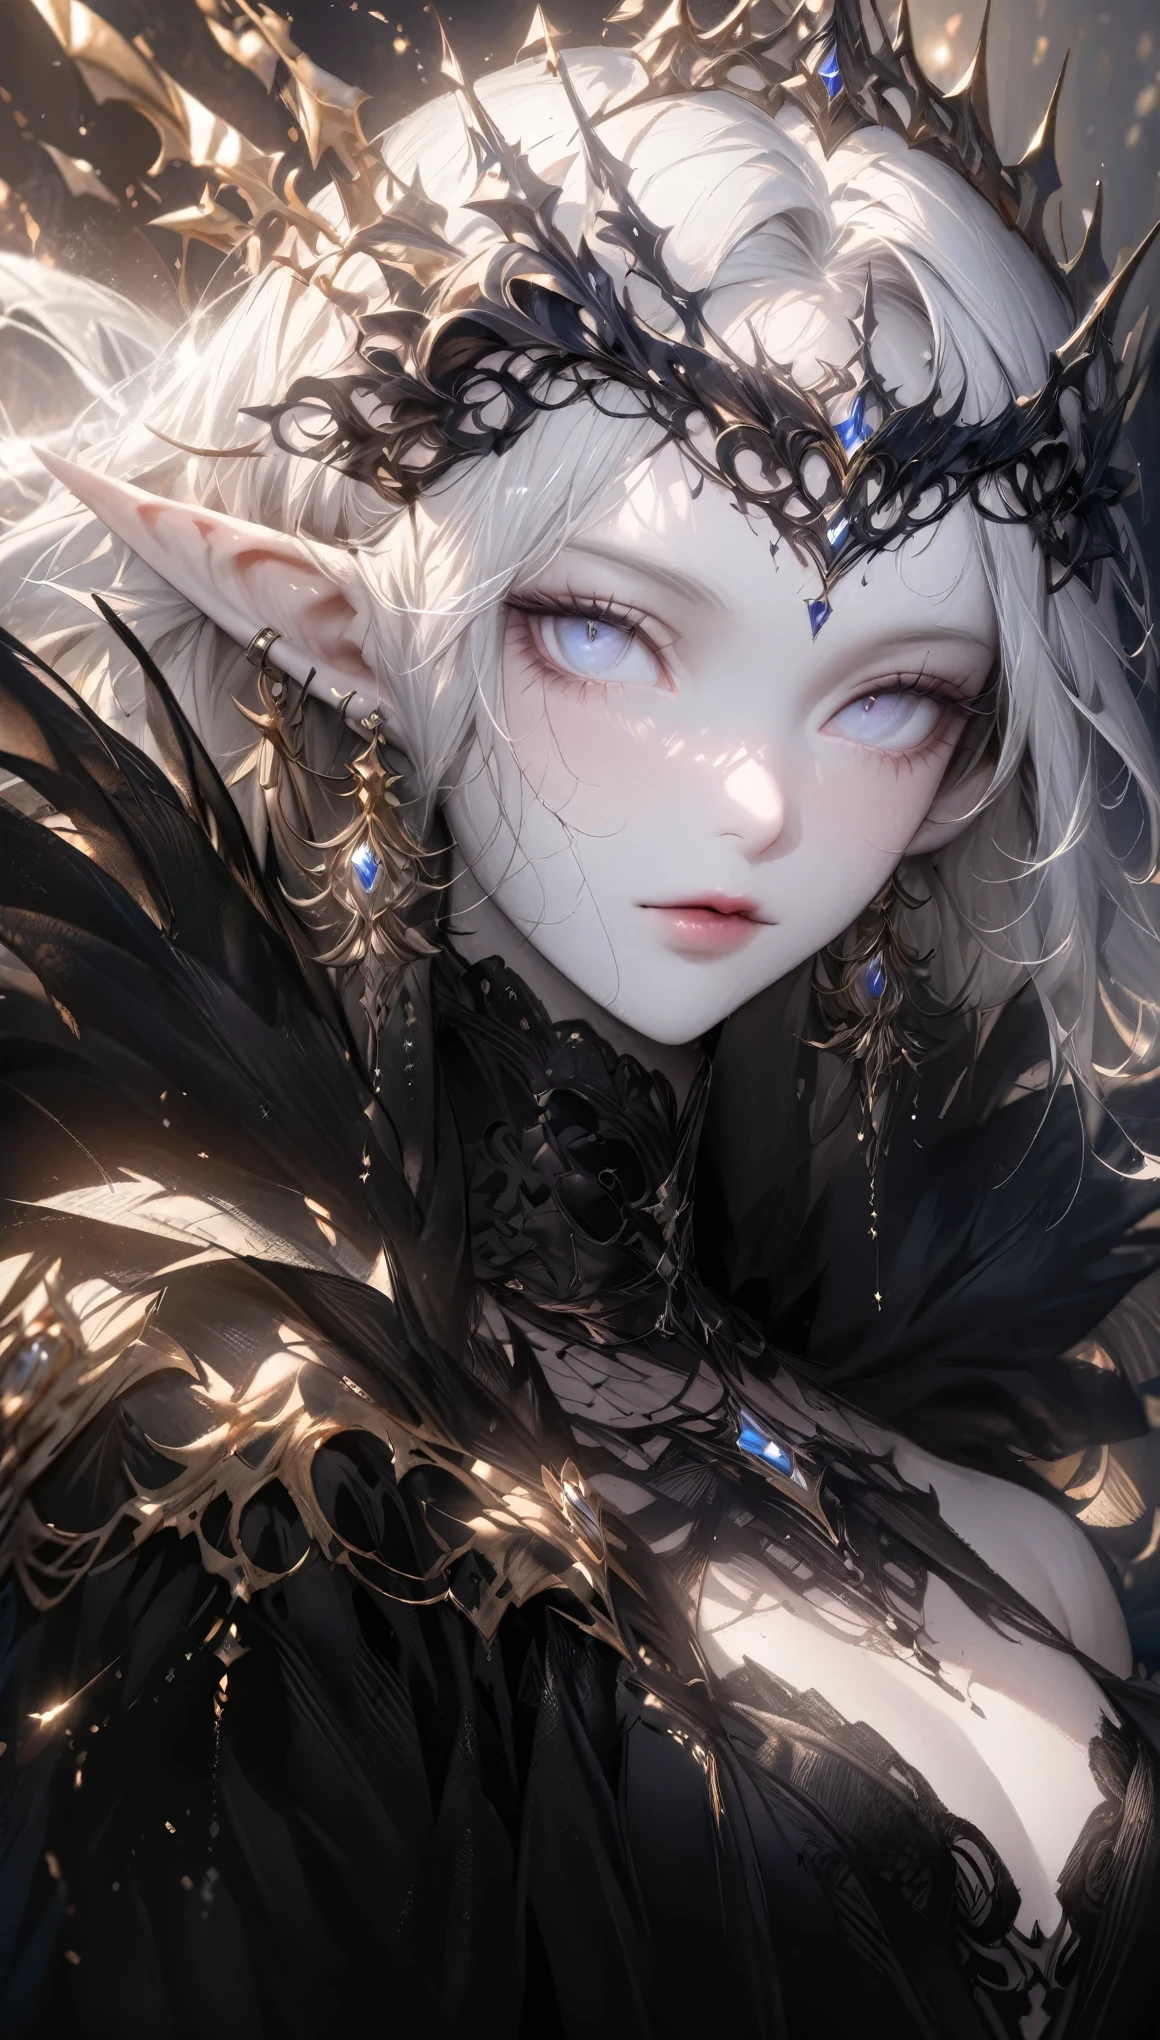 (best quality, realistic:1.37) white-haired elf, dark queen with blue eyes, portraying her royal elegance. She wears a stunning black dress that contrasts beautifully with her pale skin. Her face is flawlessly beautiful, with intricate details that highlight her enchanting features. The portrait captures her regal aura and mysterious allure. Mature young lady.